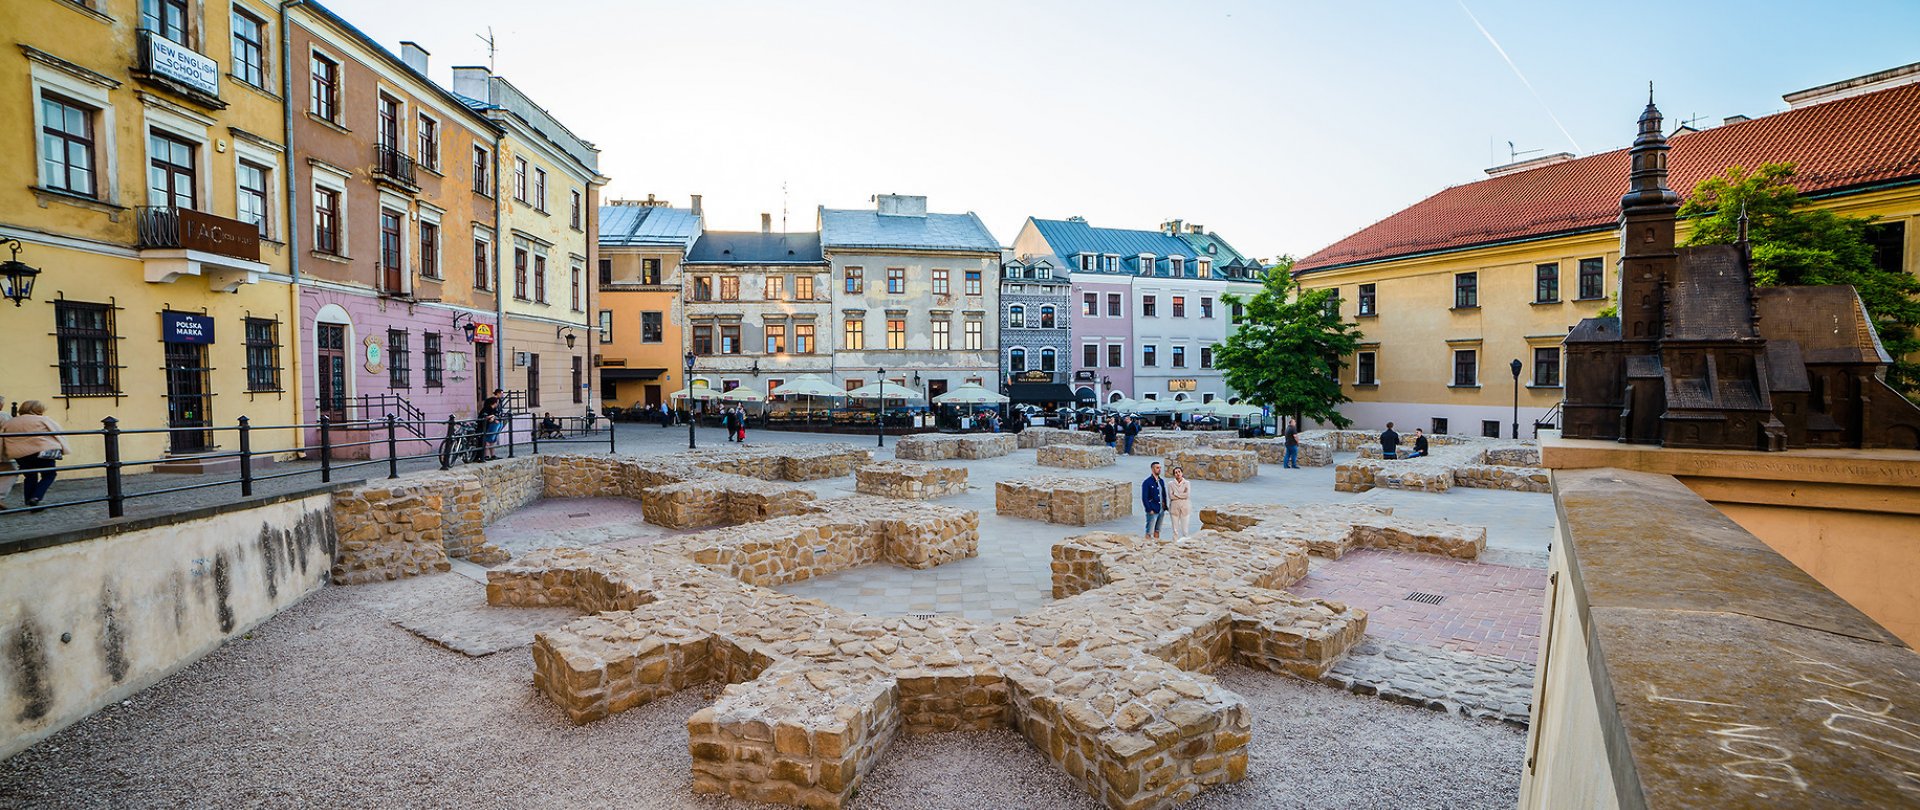 Why is it worth coming to Lublin? Discover the charms of the Old Town [1/2]